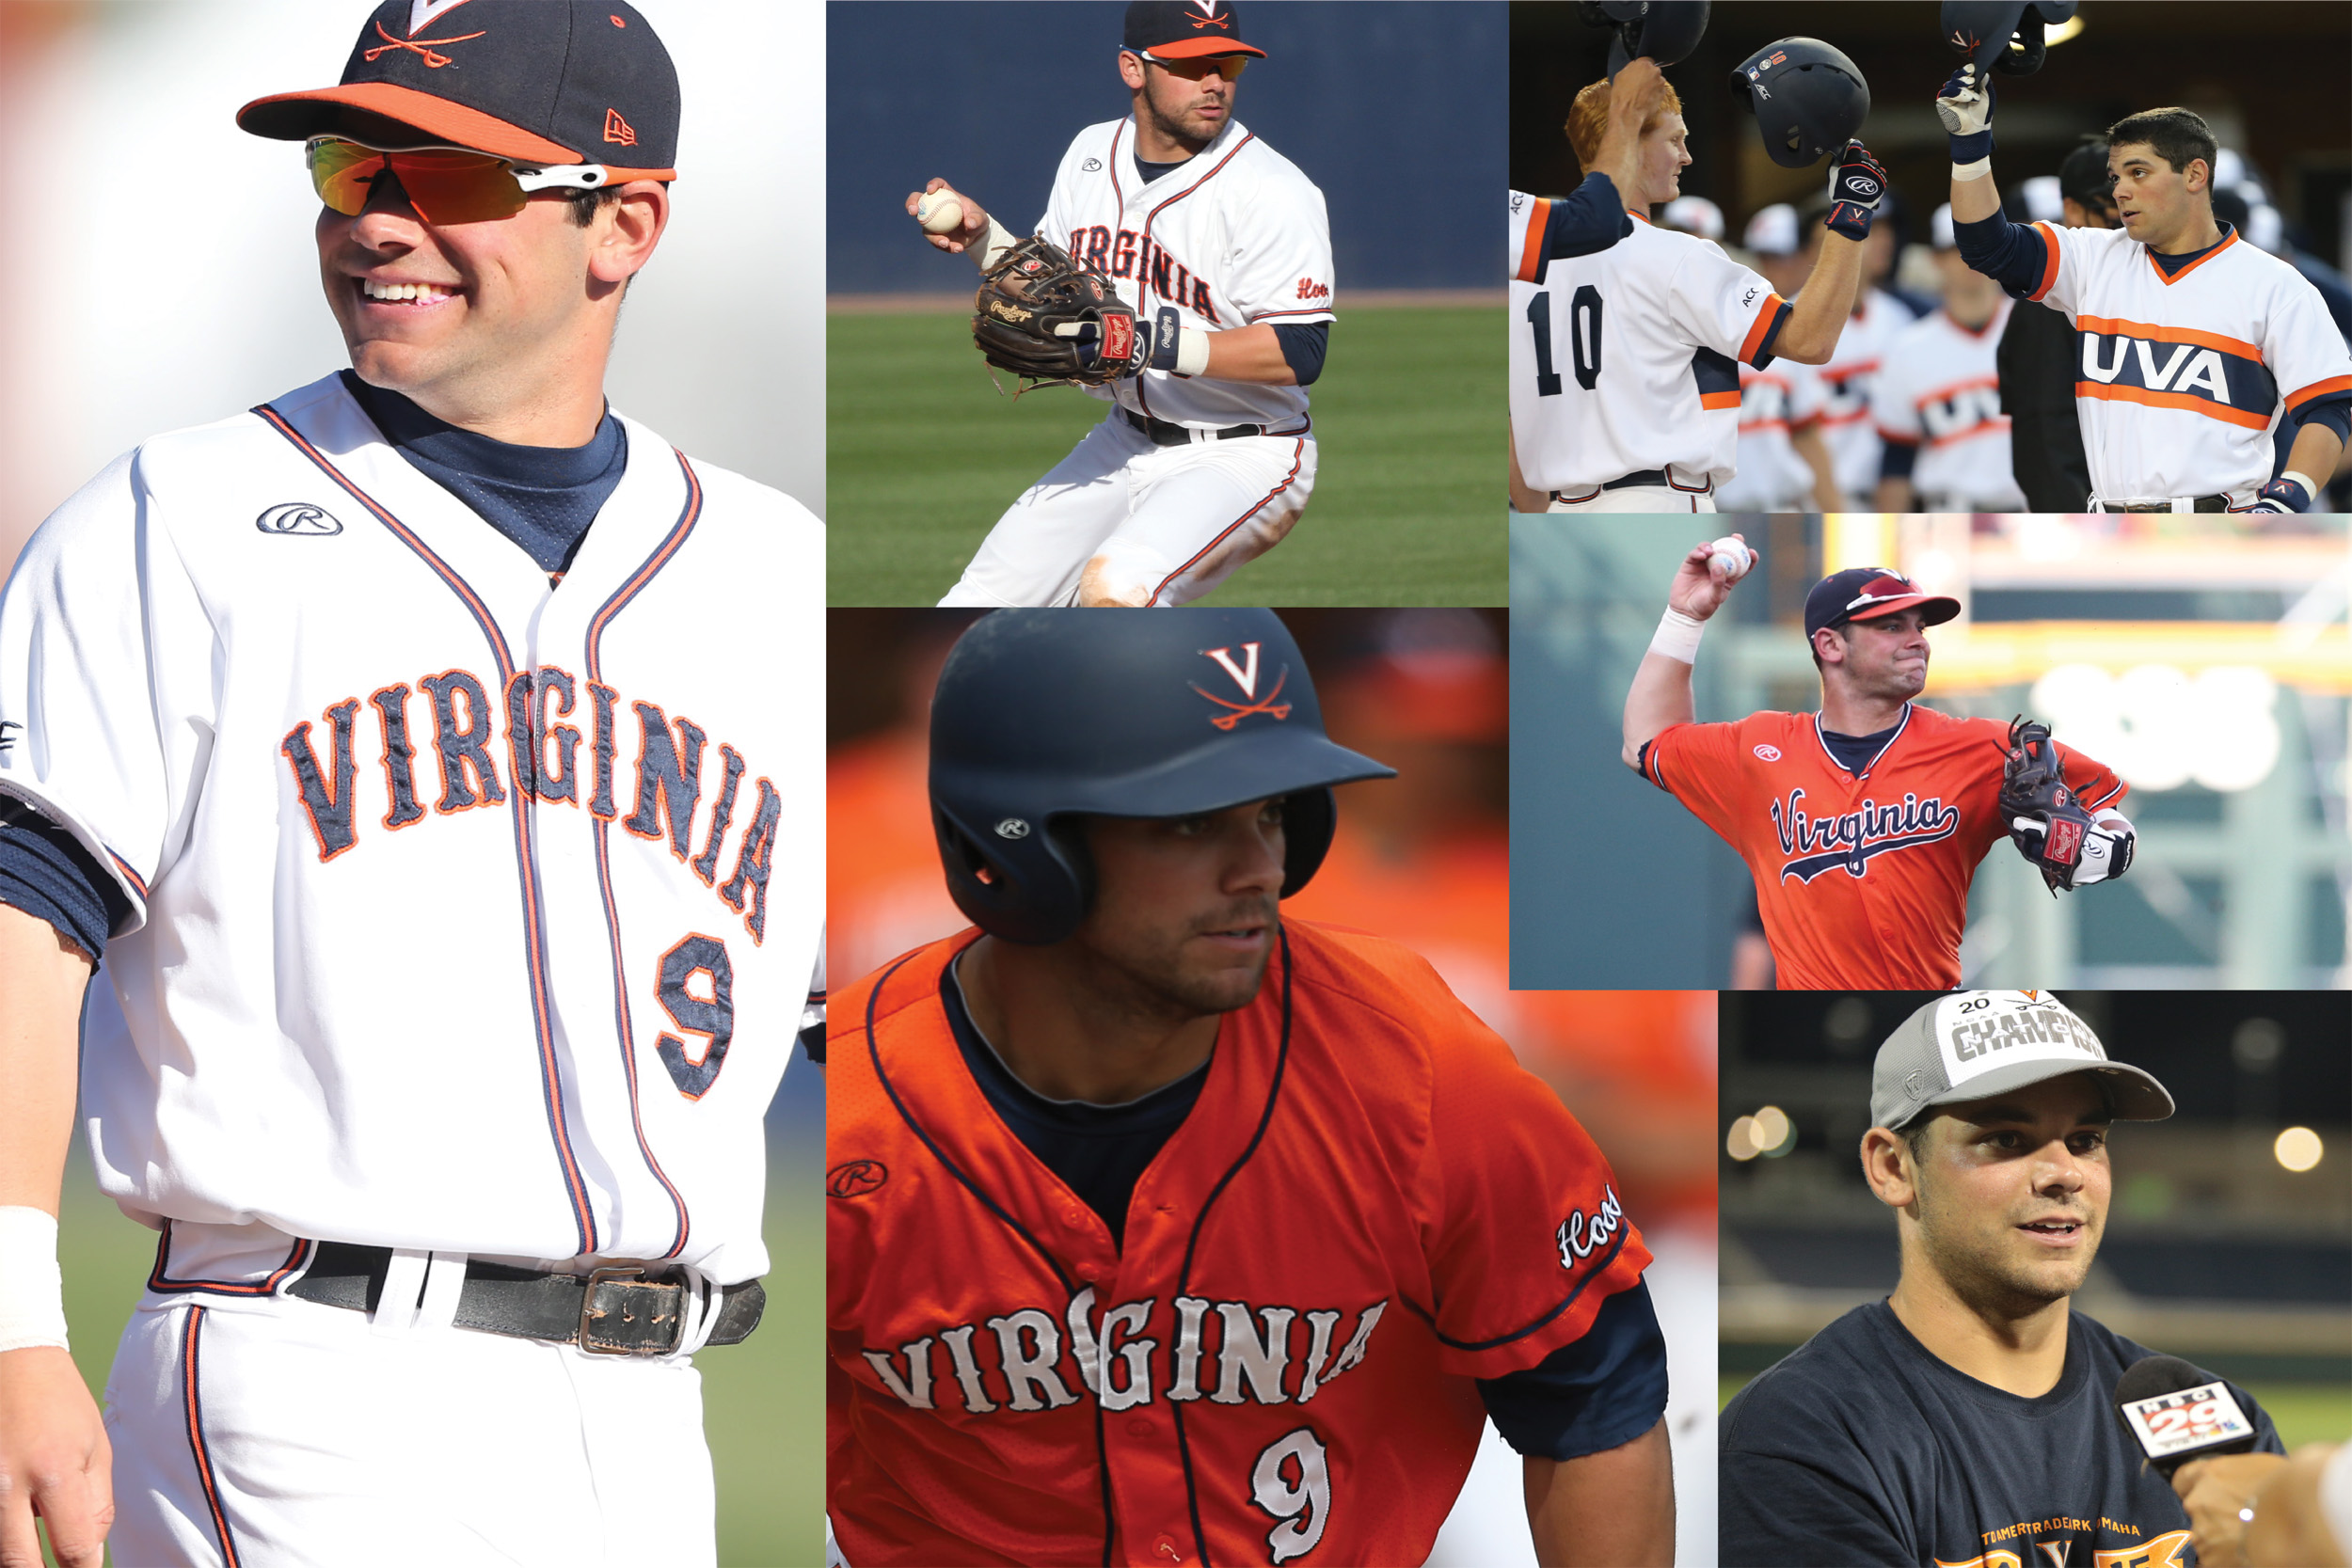 Six images of Kenny Towns playing baseball for UVA